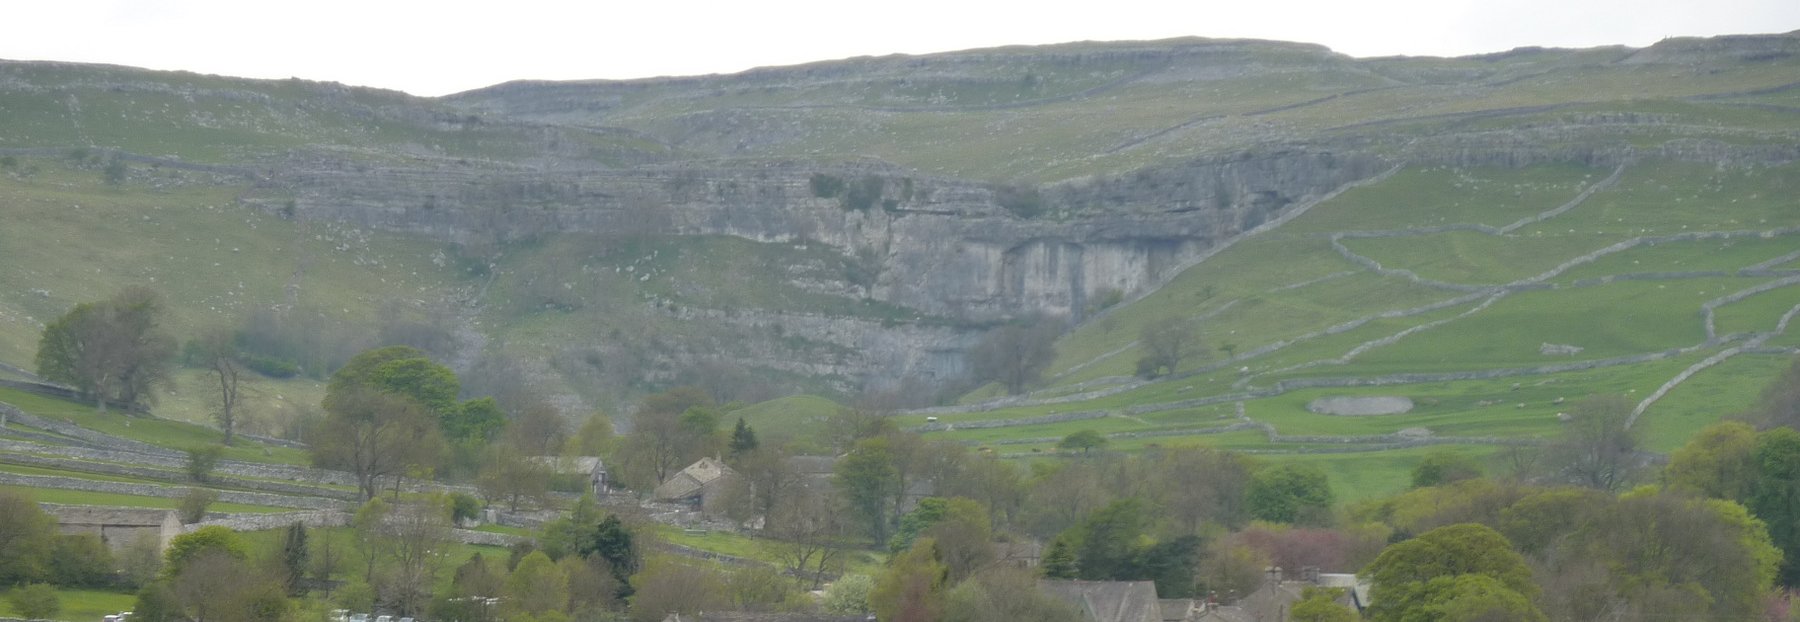 Malham Cove in the distance